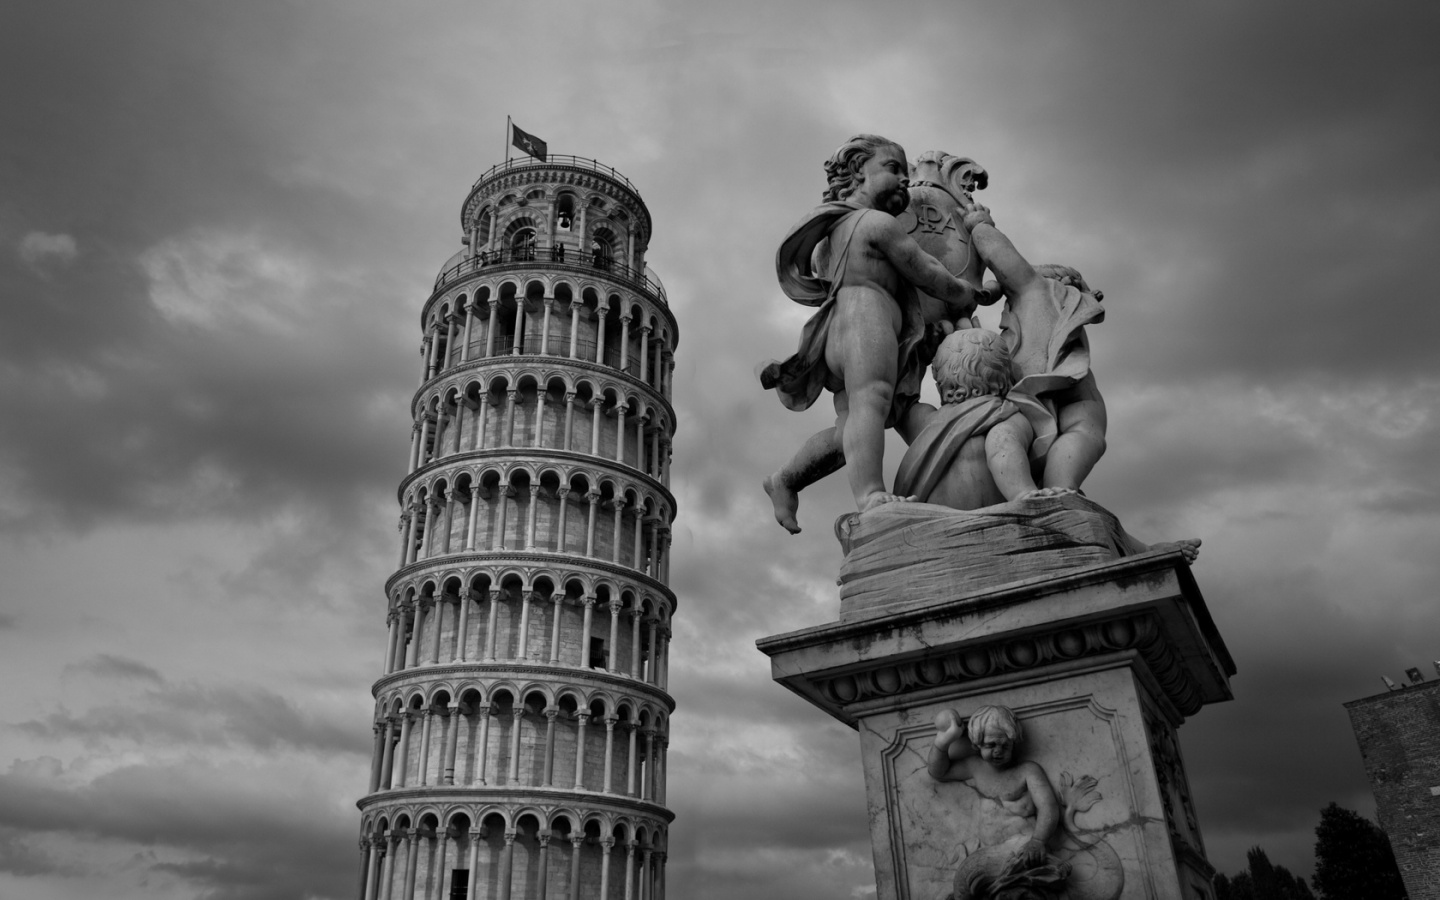 Leaning Tower Of Pisa, Italy